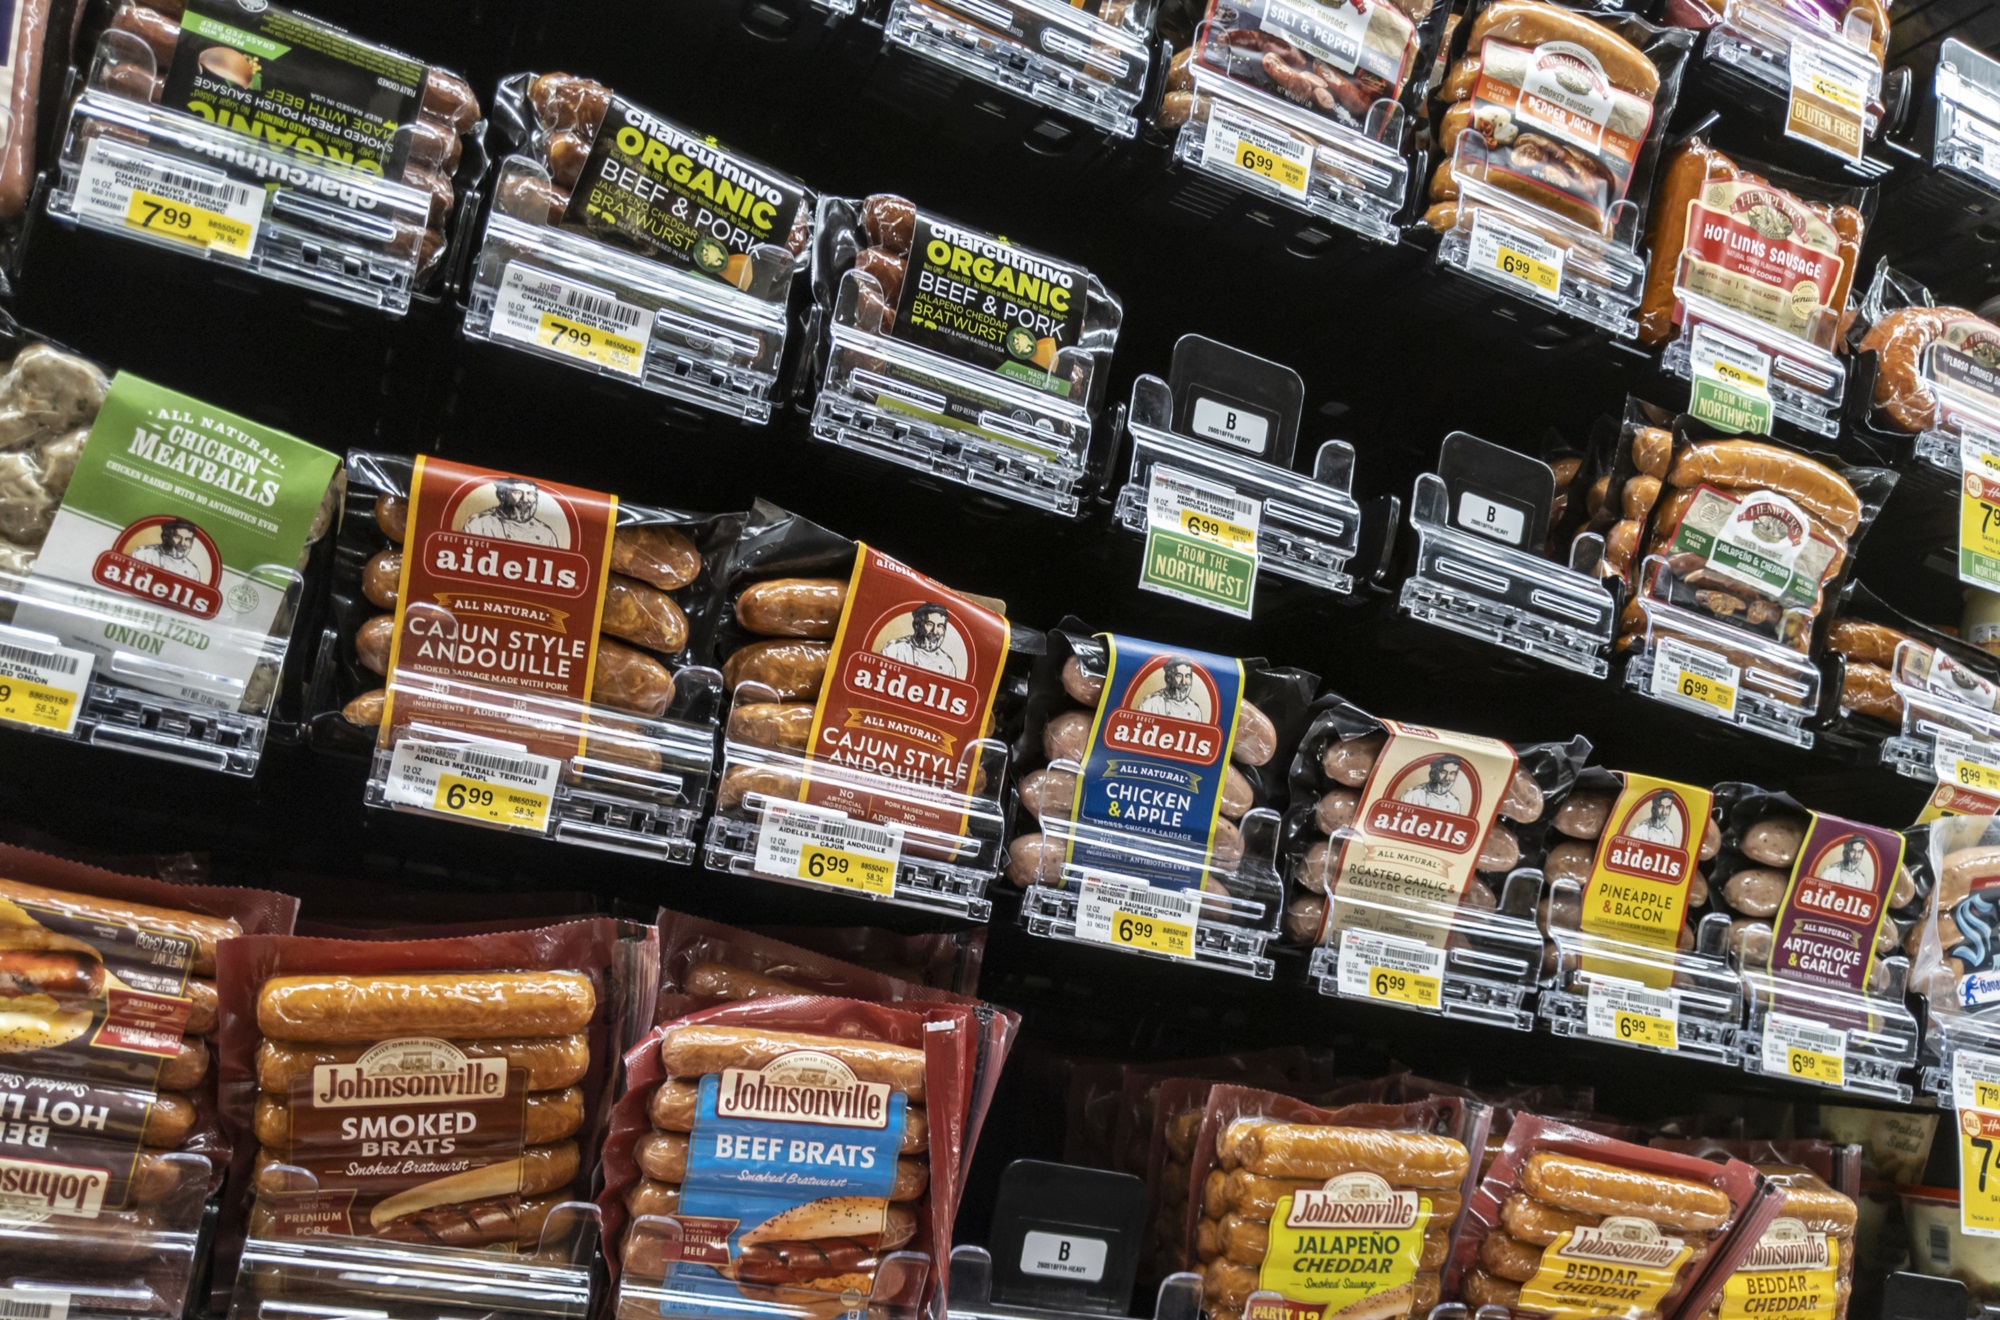 Hot dogs at the grocery store without meat warning labels